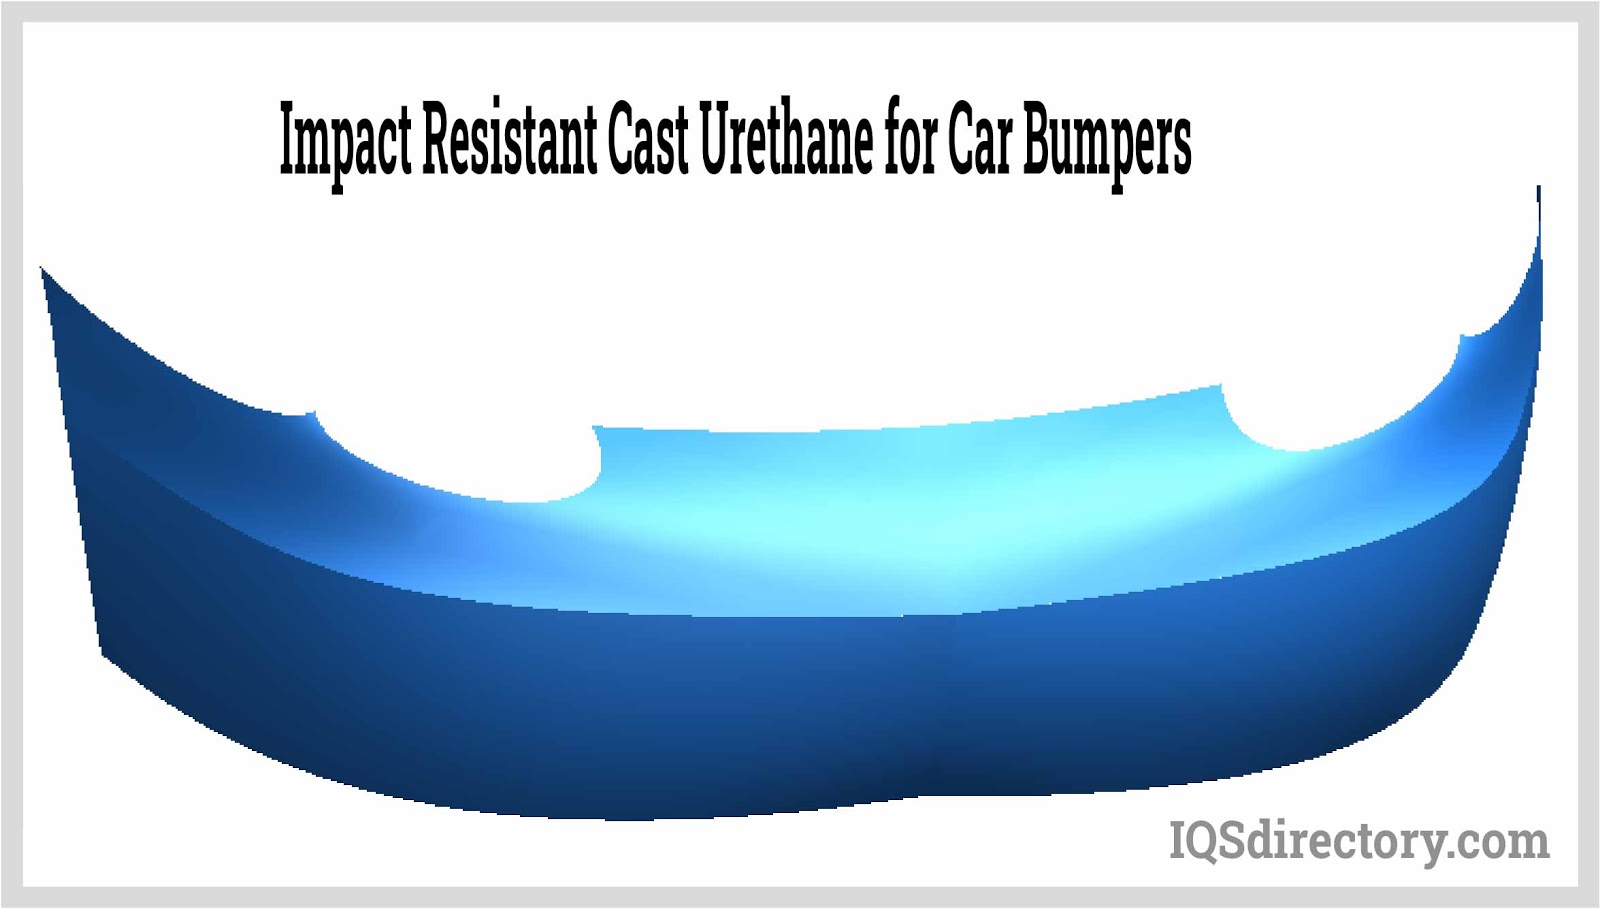 Impact Resistant Cast Urethane for Car Bumpers